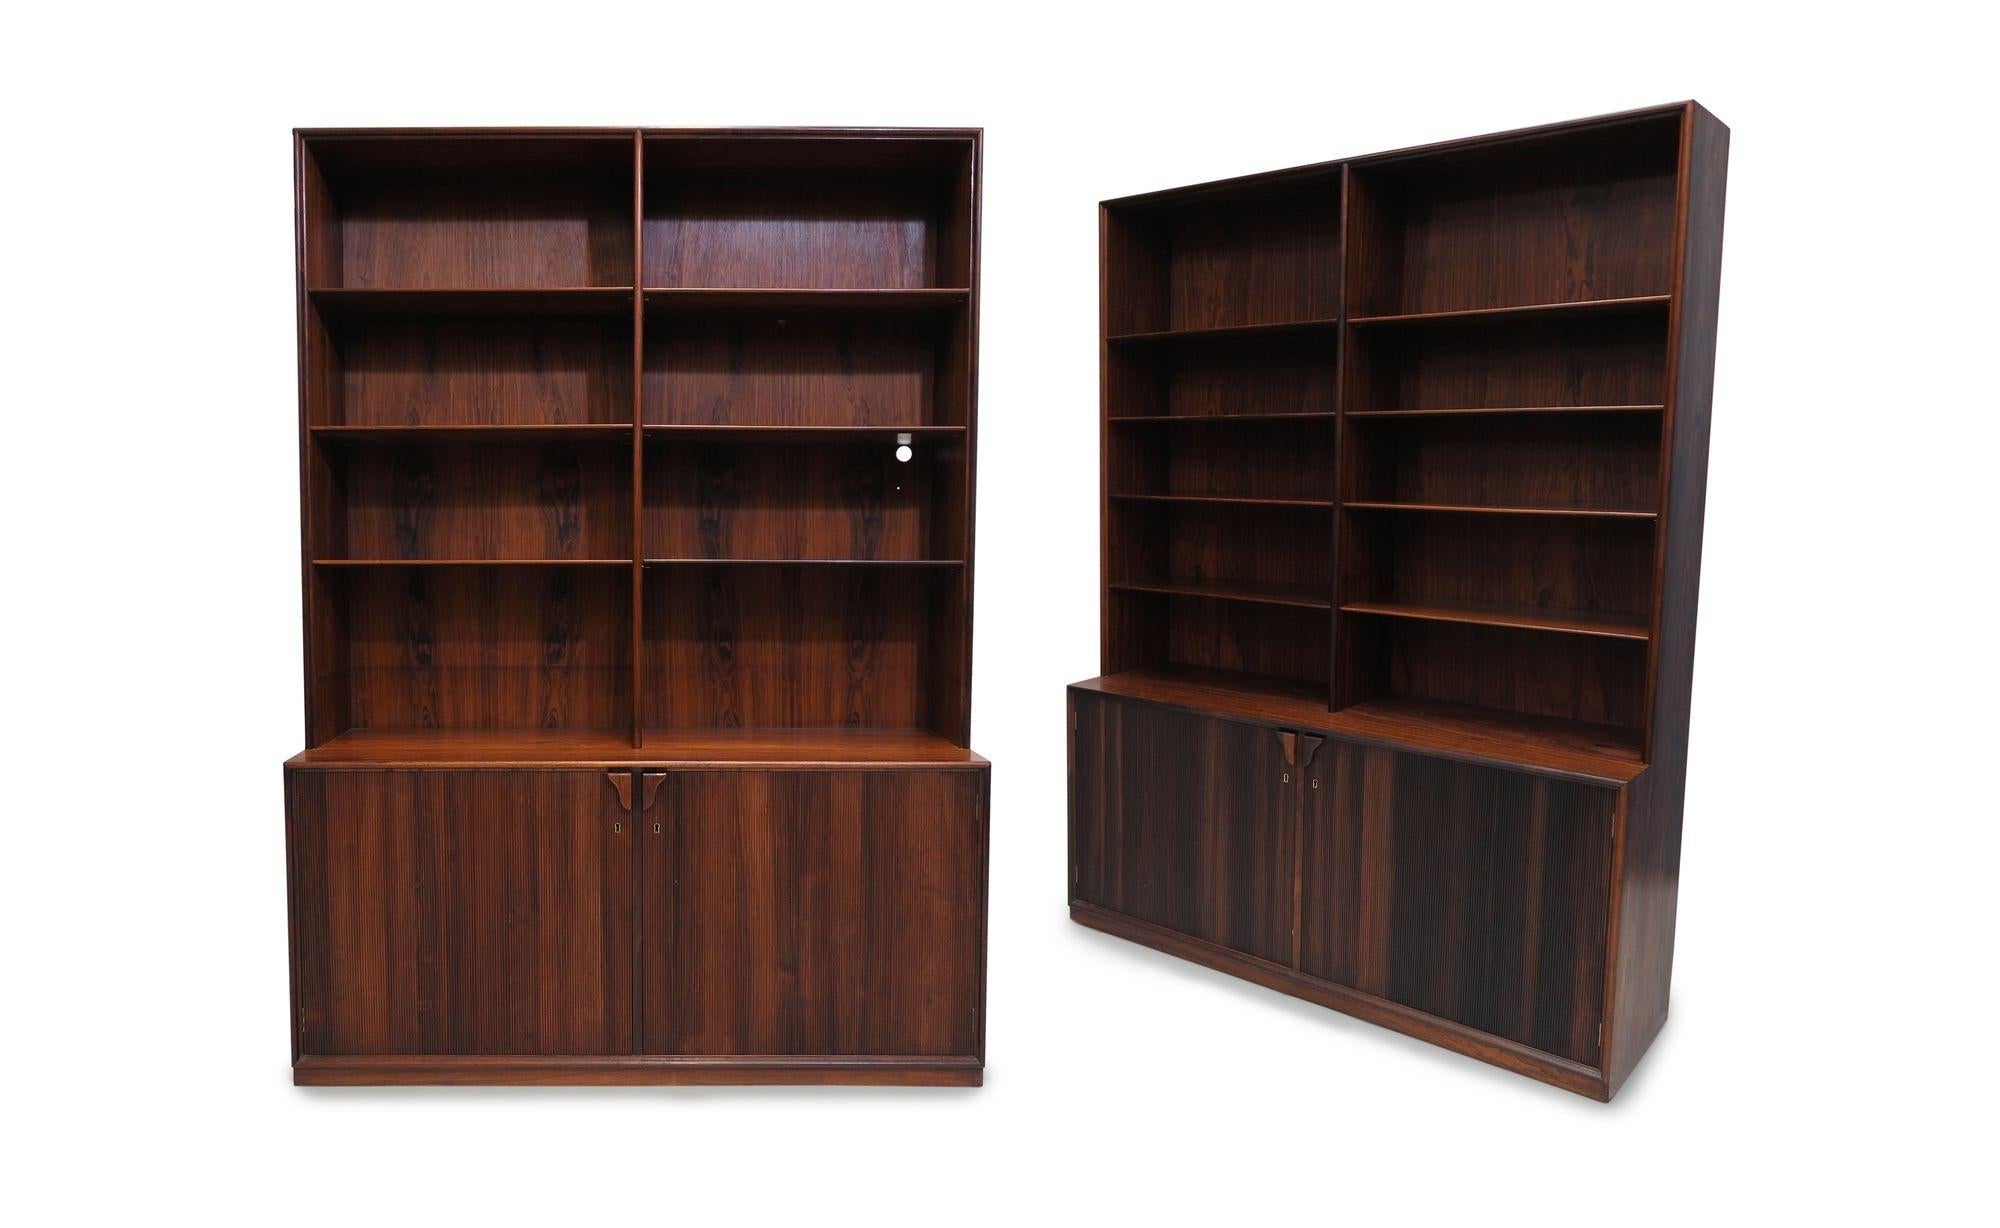 Pair of elegant midcentury cabinets designed by Frode Holm for Illums Bolighus, 1955, Denmark. The cabinets are crafted of the finest Brazilian rosewood and exhibit fine joinery throughout with routed edges, tapered shelves and full panel sides The